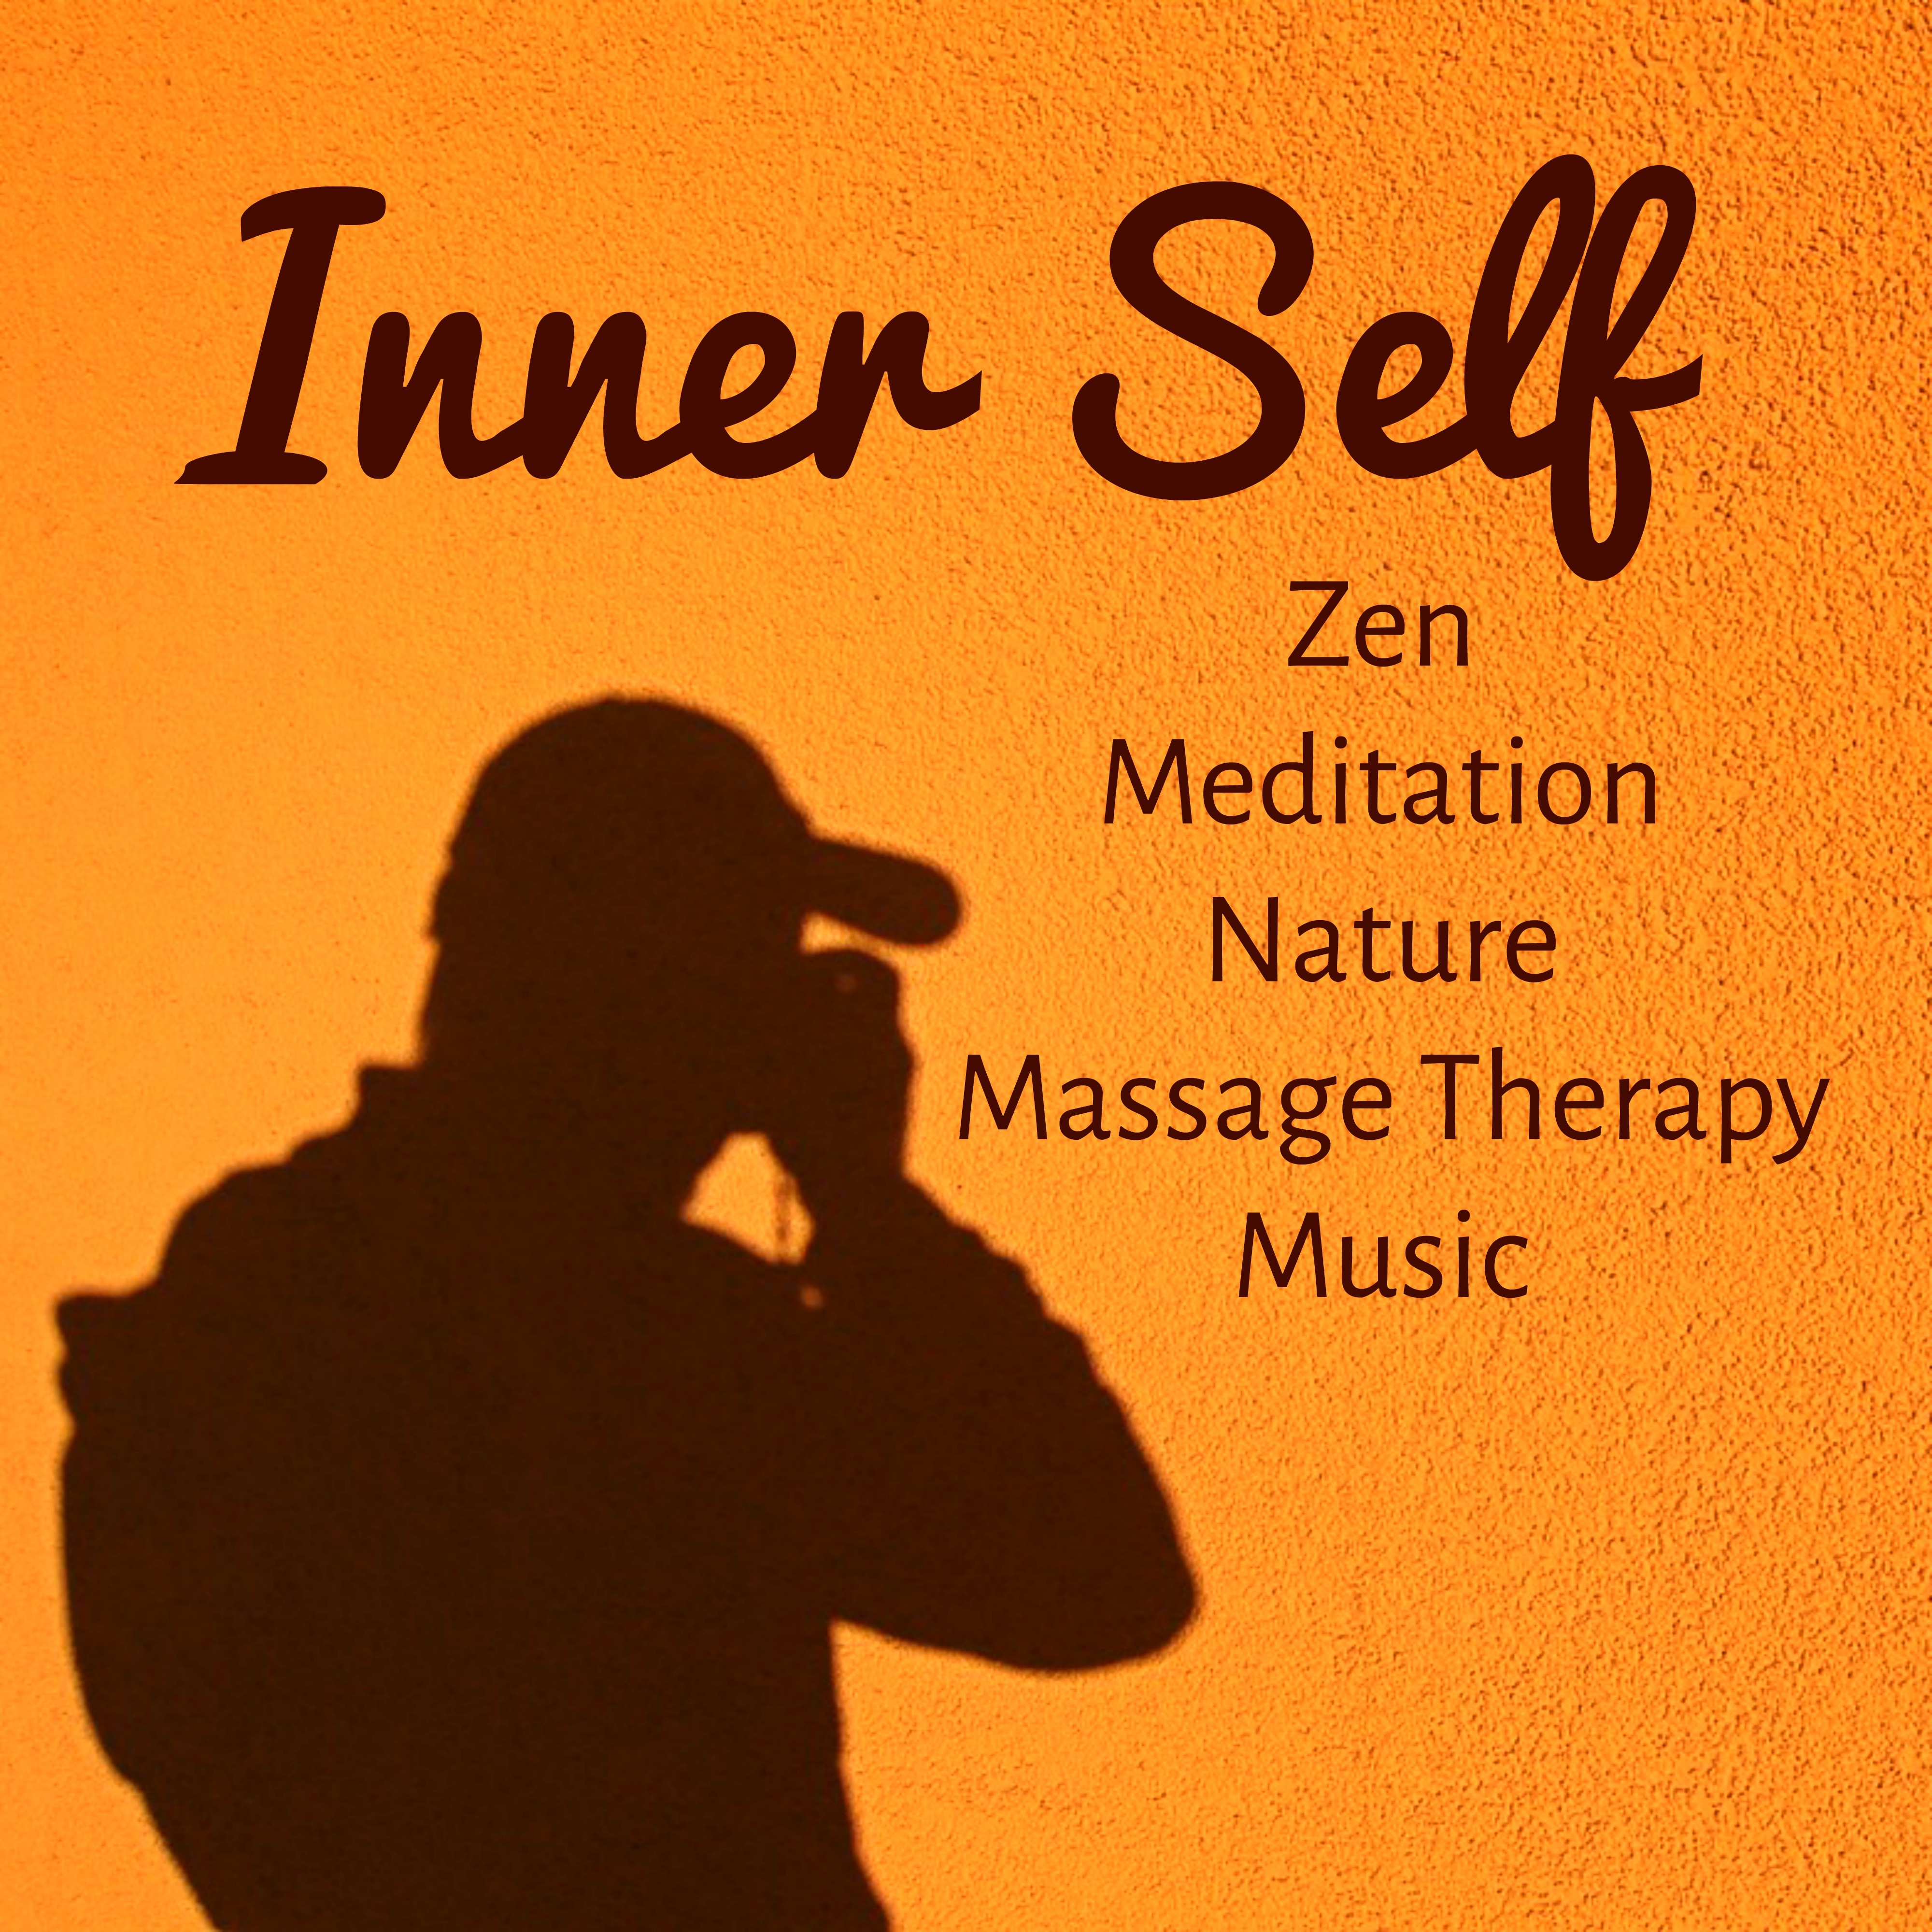 Inner Self - Zen Meditation Nature Massage Therapy Music for Deep Relaxation Insomnia Treatment Biofeedback Training with Instrumental Binaural Healing Sounds